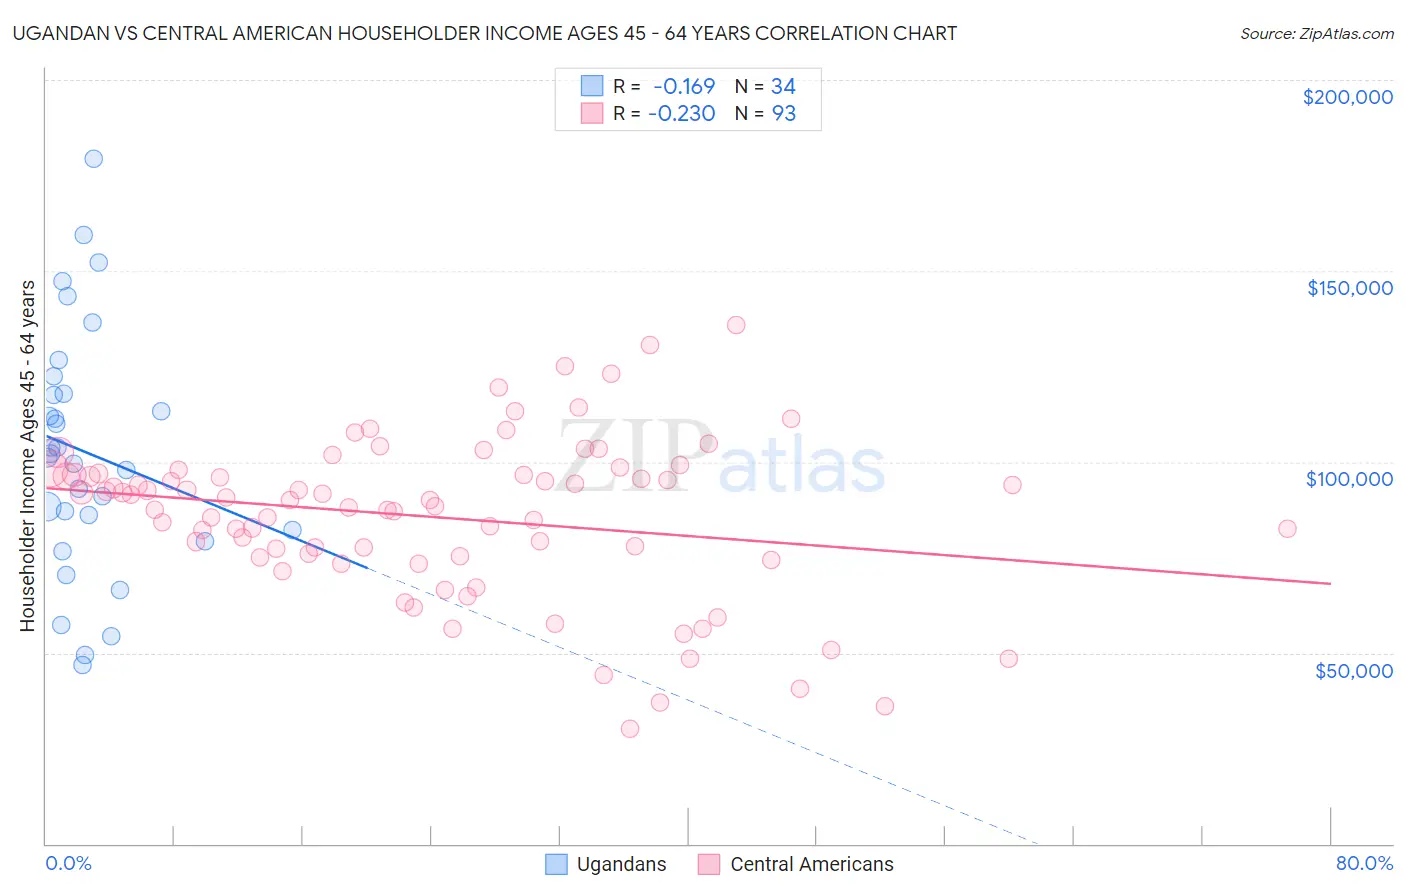 Ugandan vs Central American Householder Income Ages 45 - 64 years